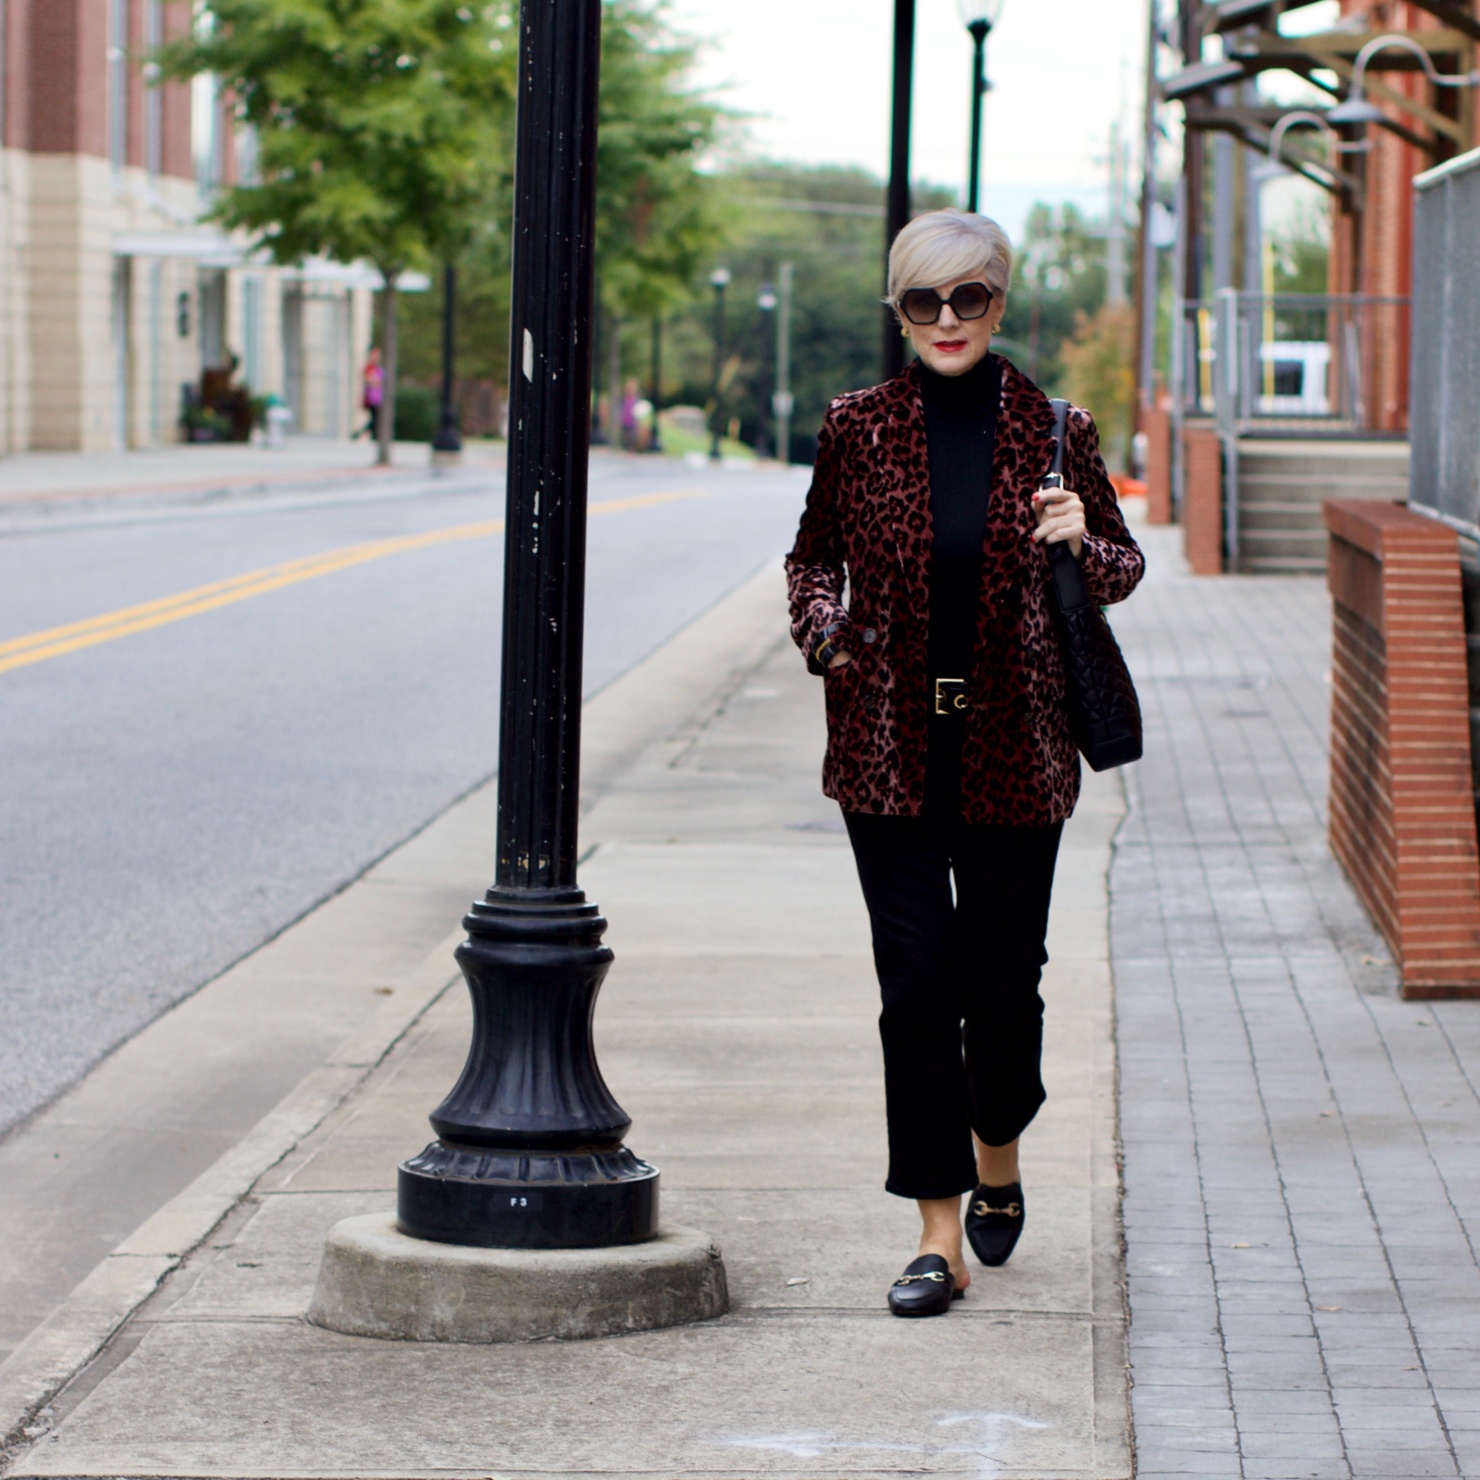 beth at Style at a Certain Age wears a J.Crew leopard blazer, cropped black jeans, Ralph Lauren turtleneck and Gucci dupes